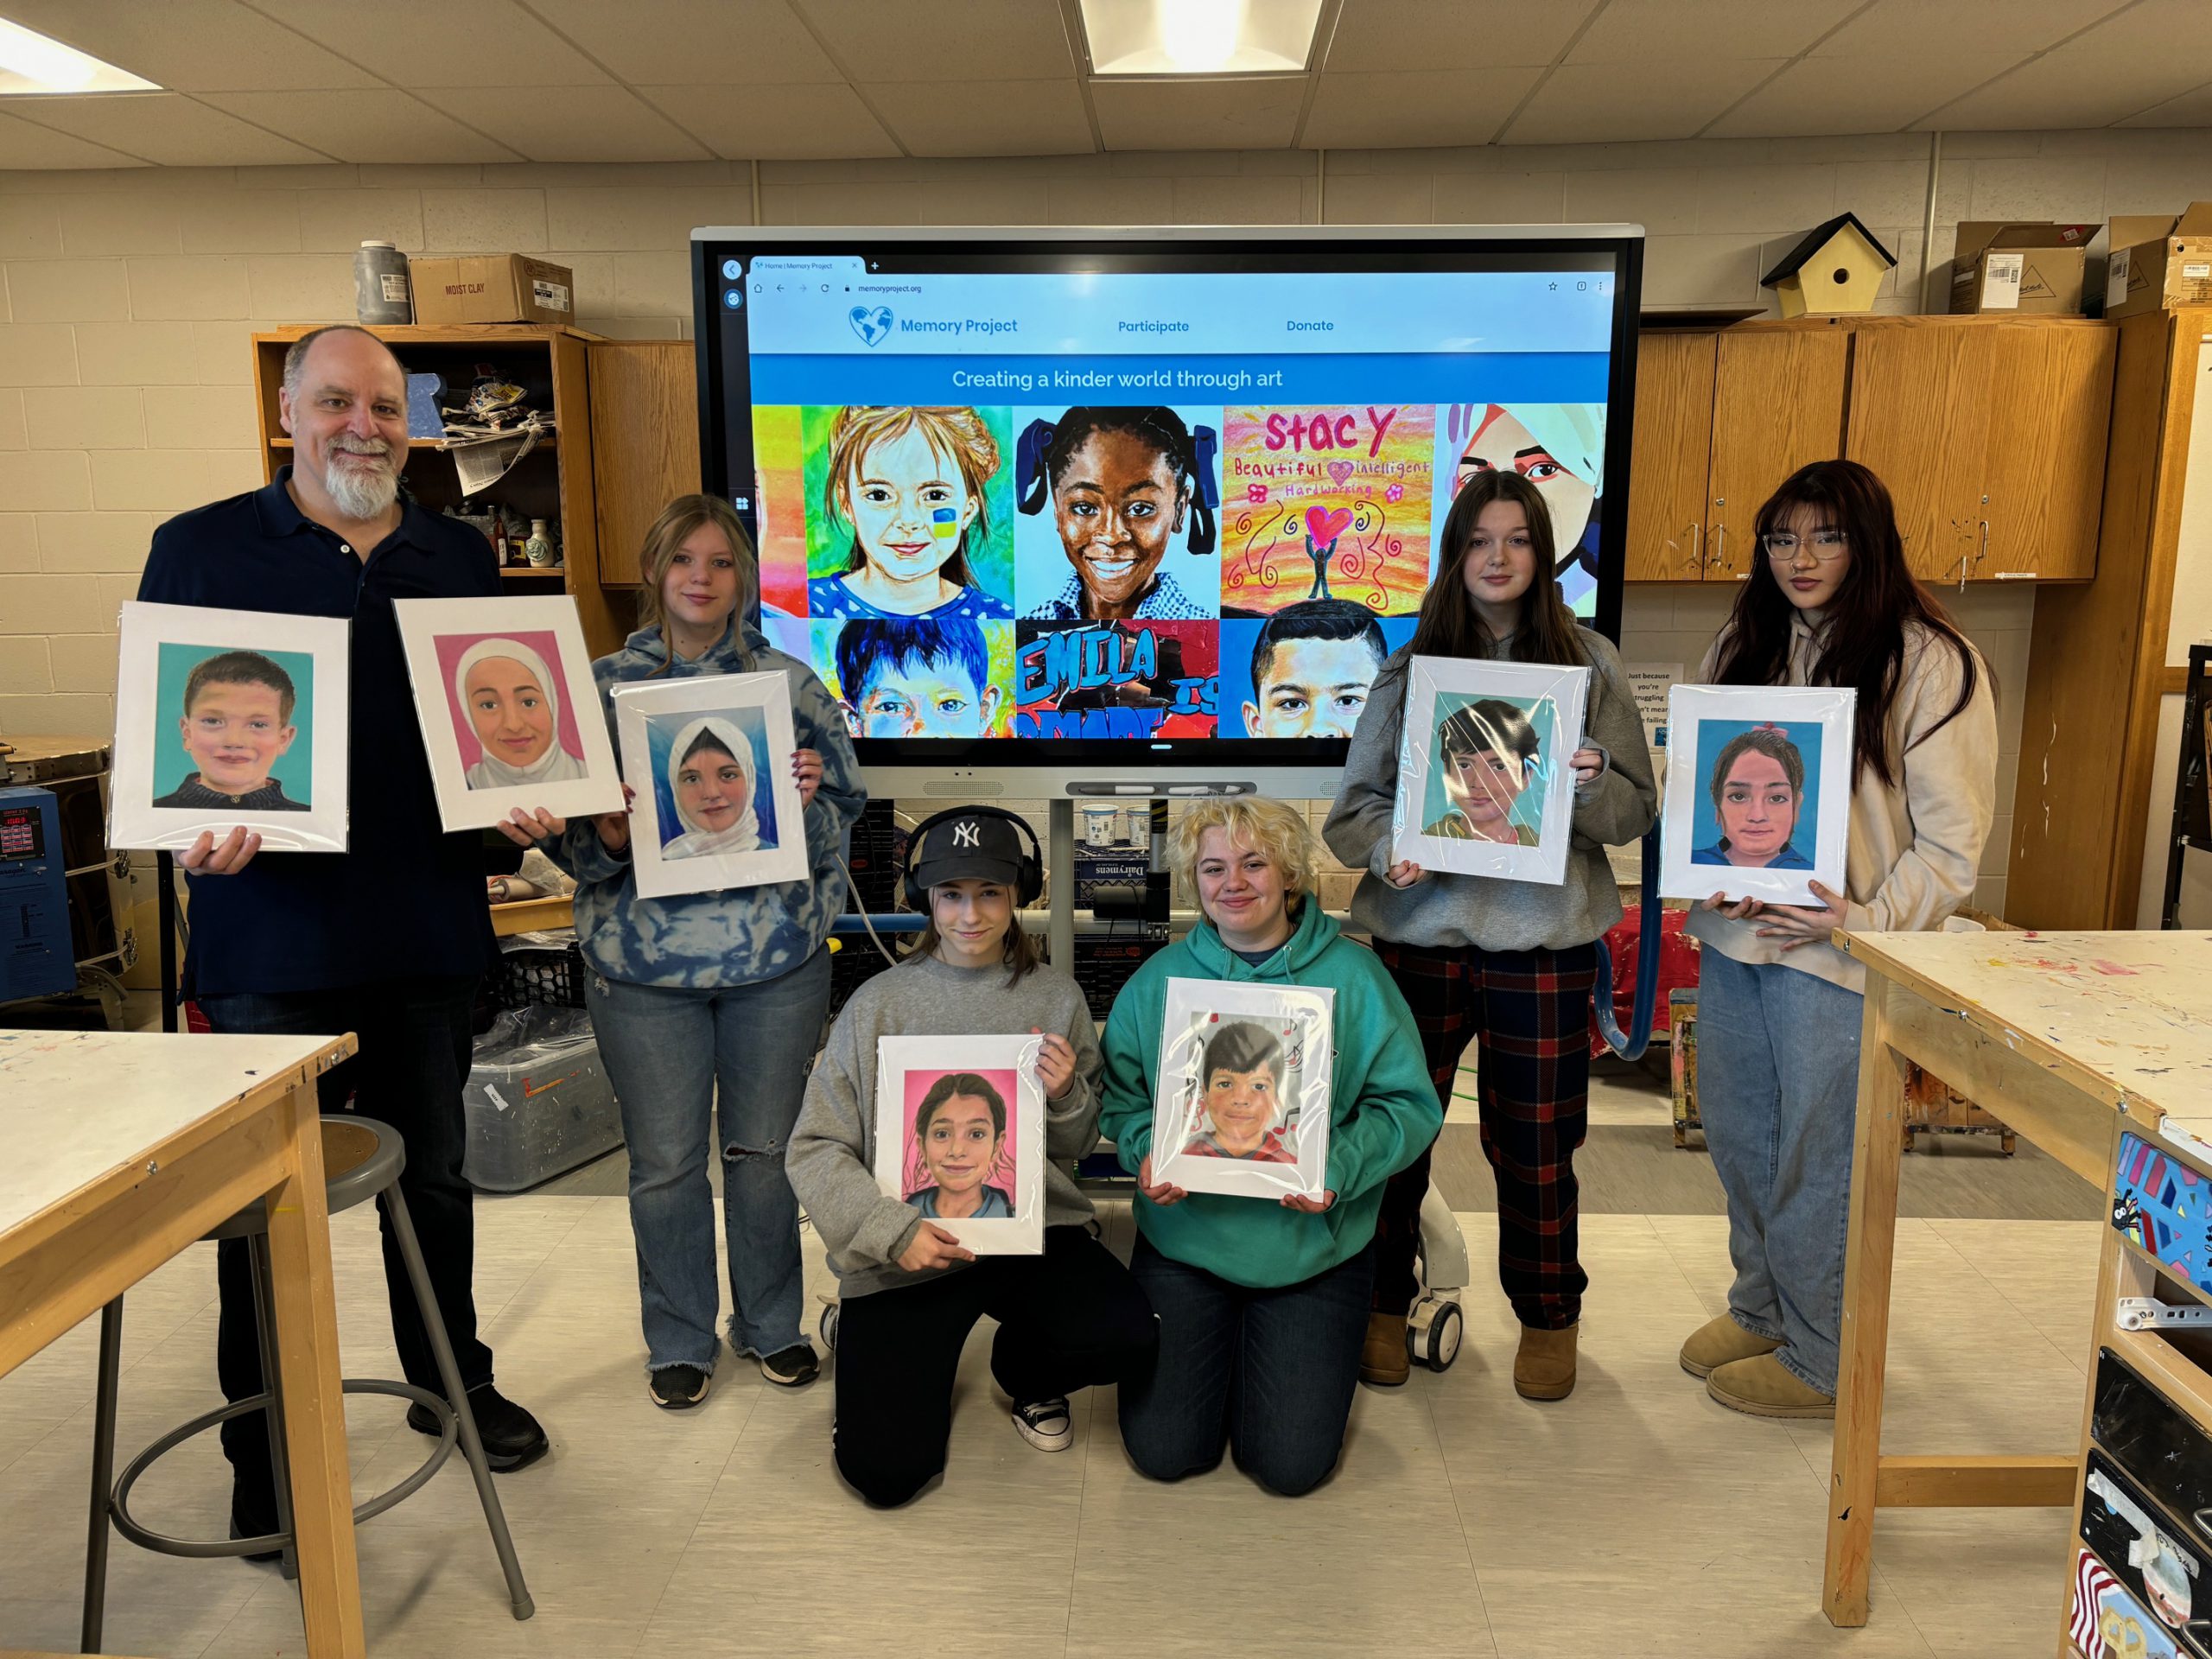 Five students and one teacher stand together holding painted portraits.